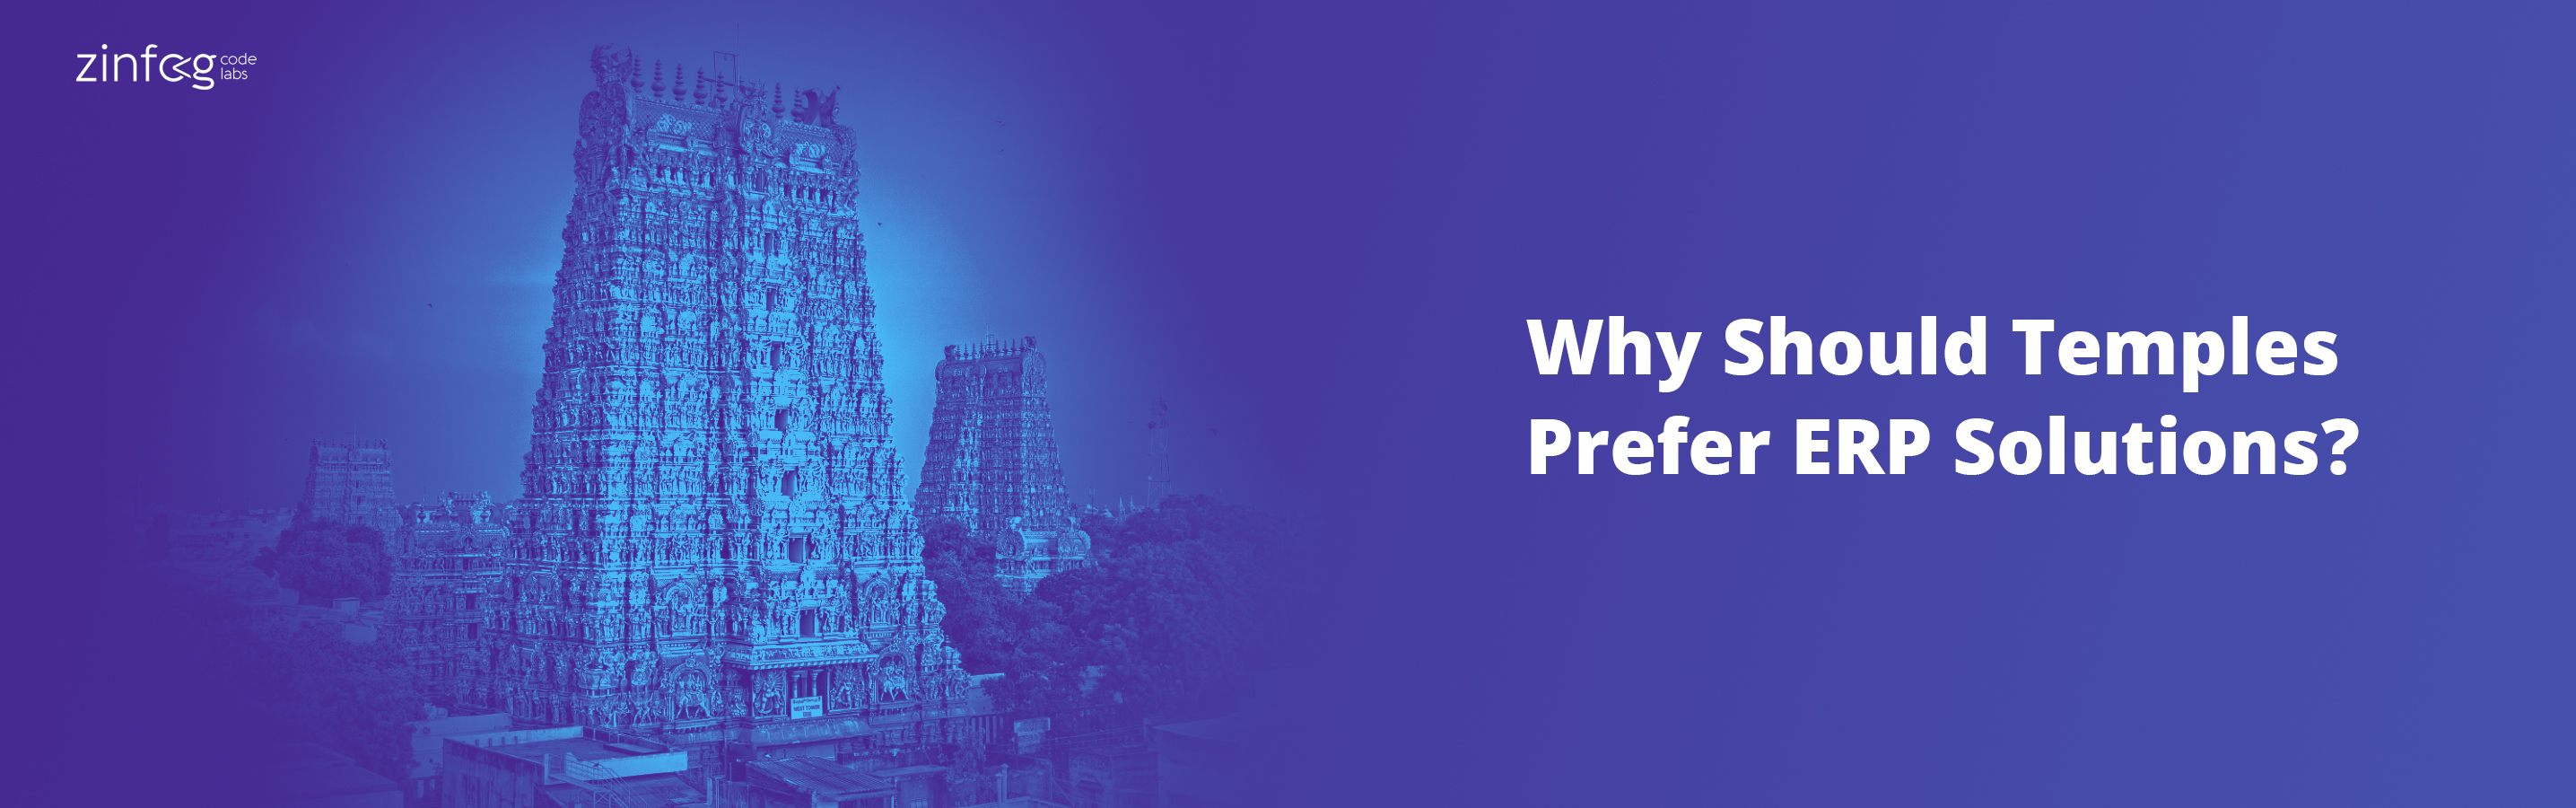 why_should_temples_prefer_solutions.html